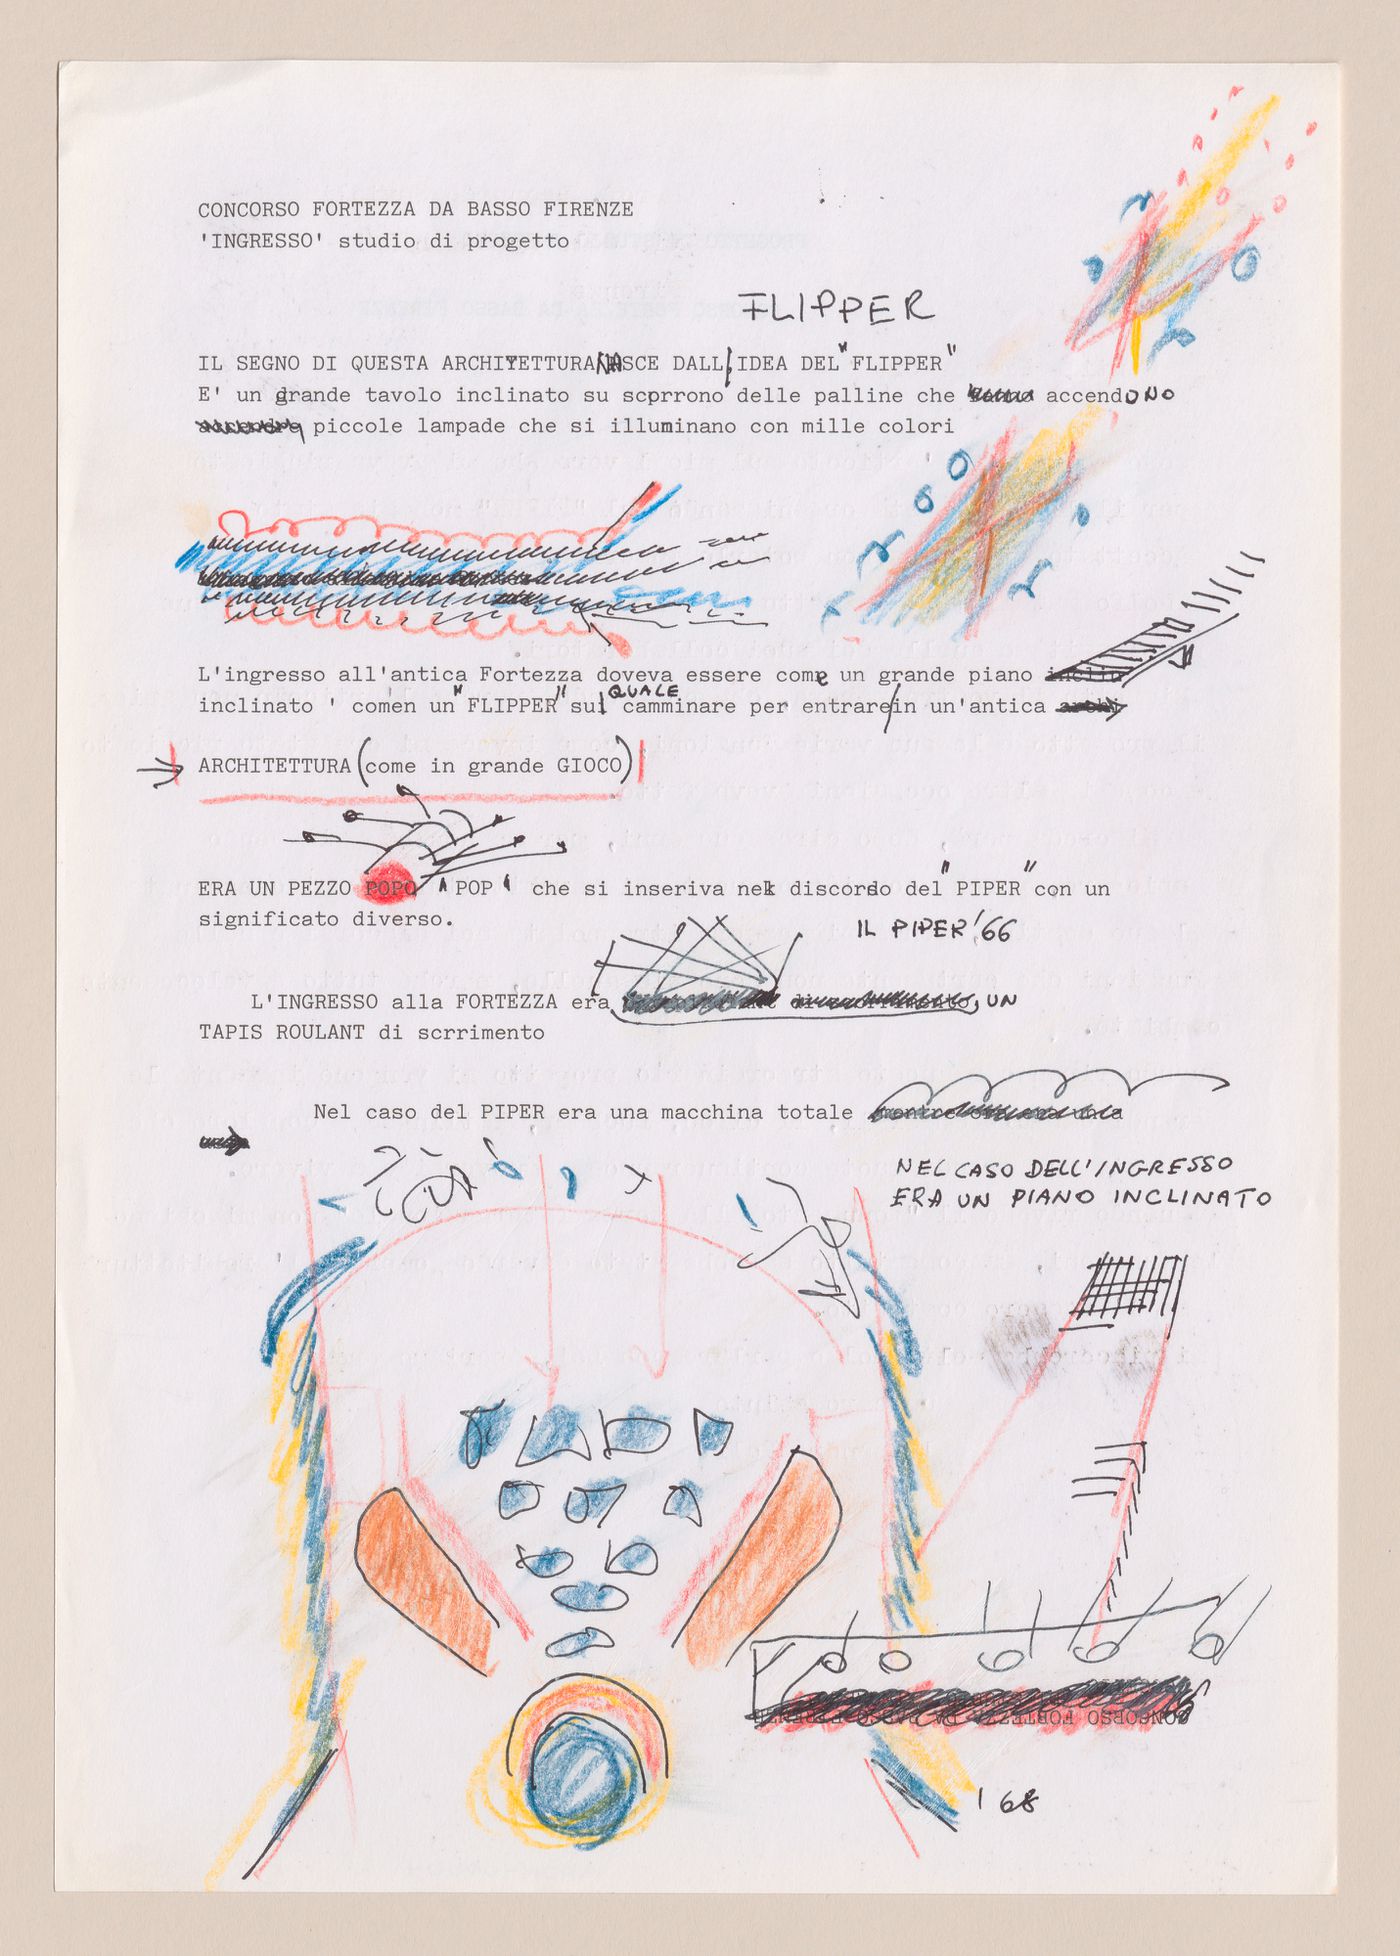 Document with notes and sketches for Fortezza da Basso, National Centre for Arts and Crafts, Florence, Italy